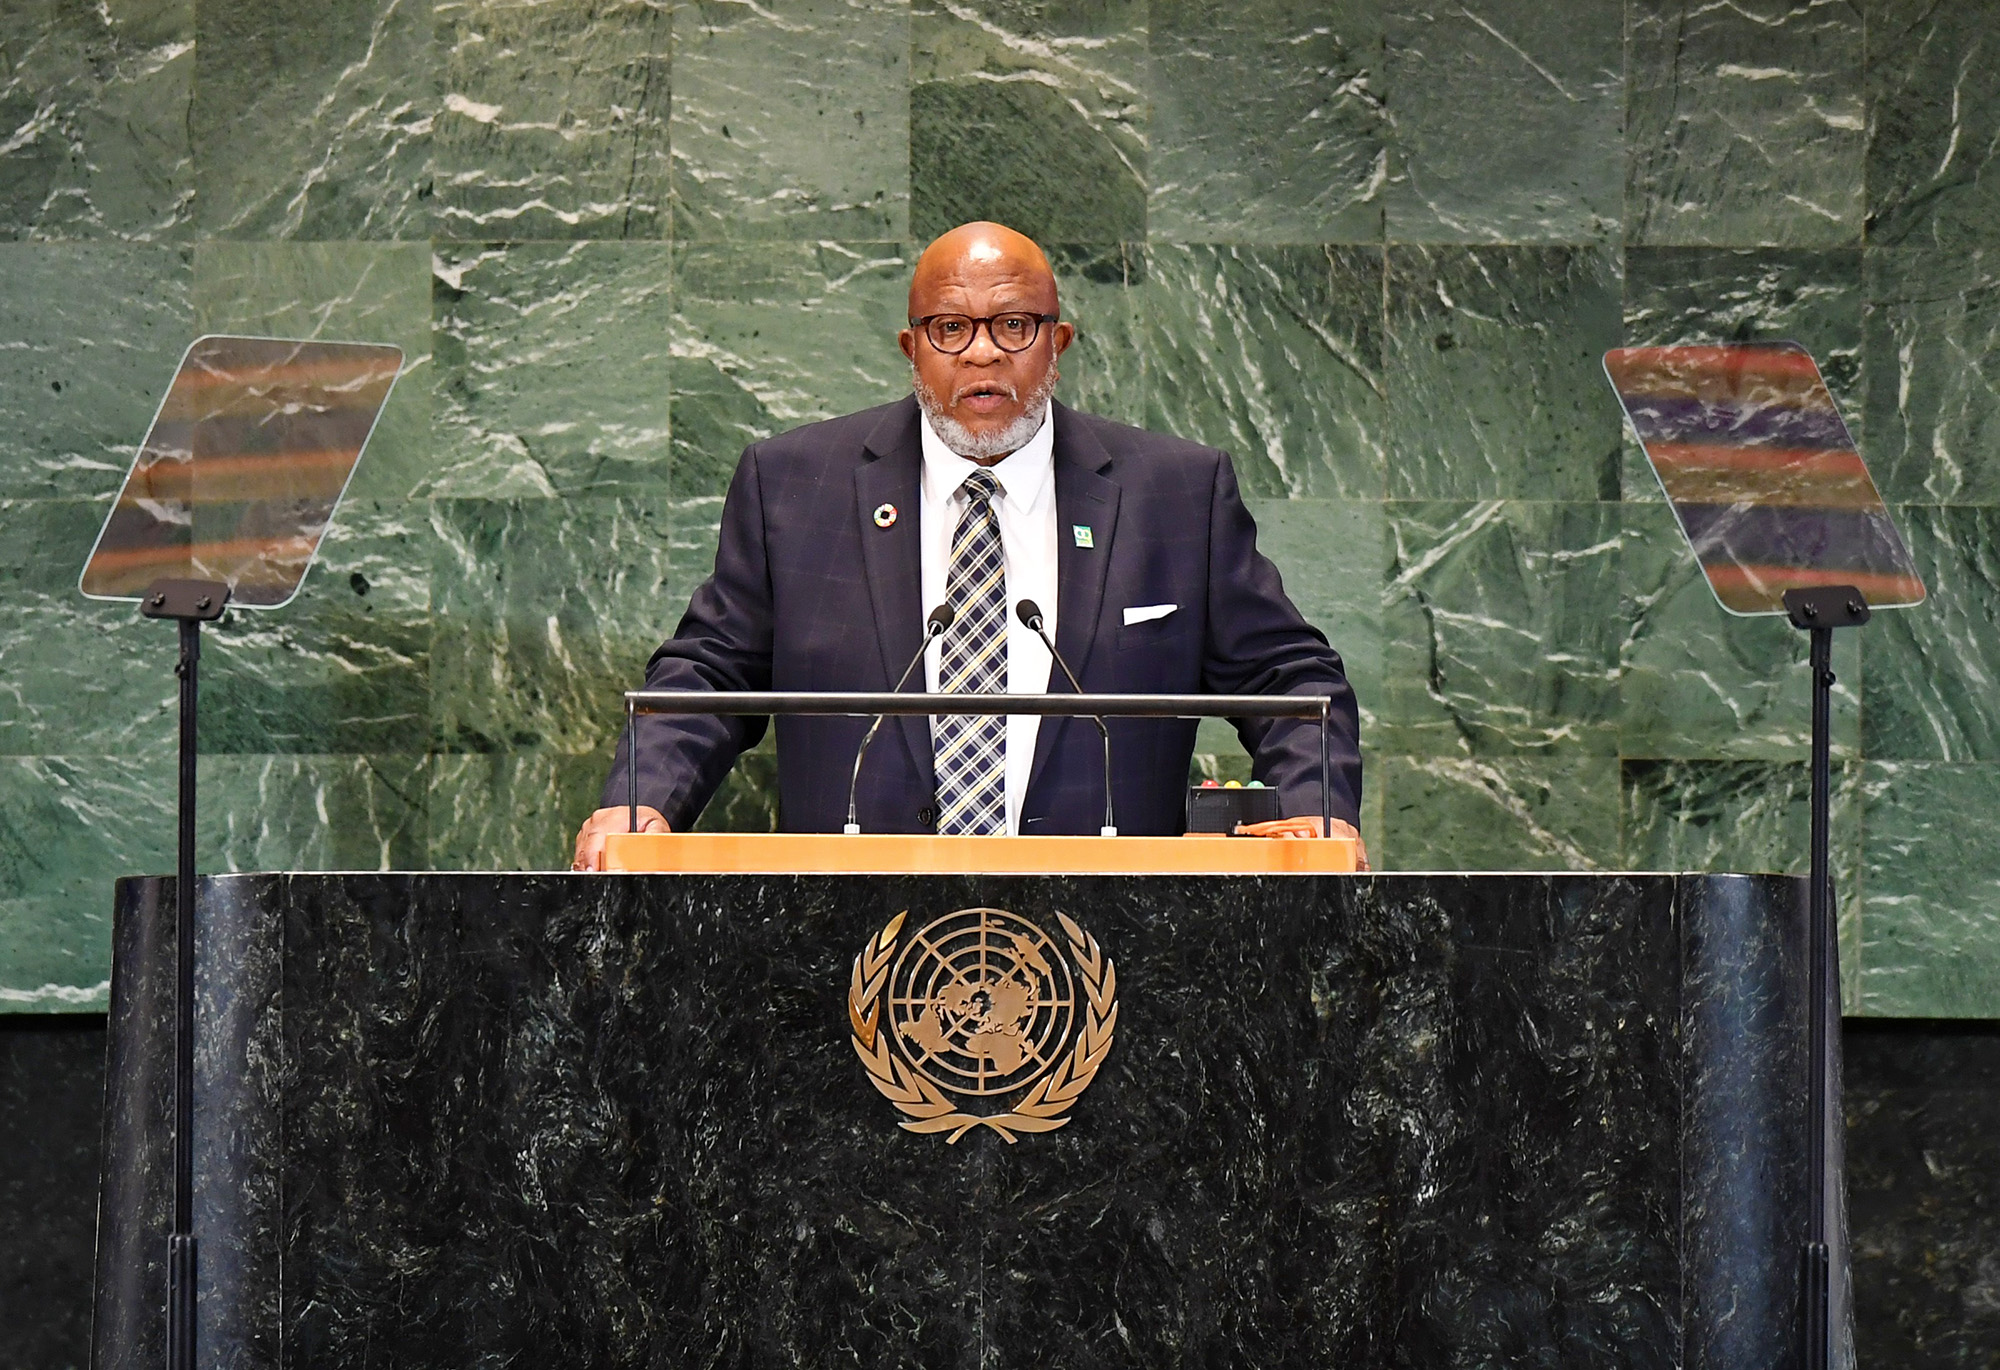 UN General Assembly President Dennis Francis delivers his opening remarks during the Sustainable Development Goals Summit at the UN headquarters in New York, on September 18.